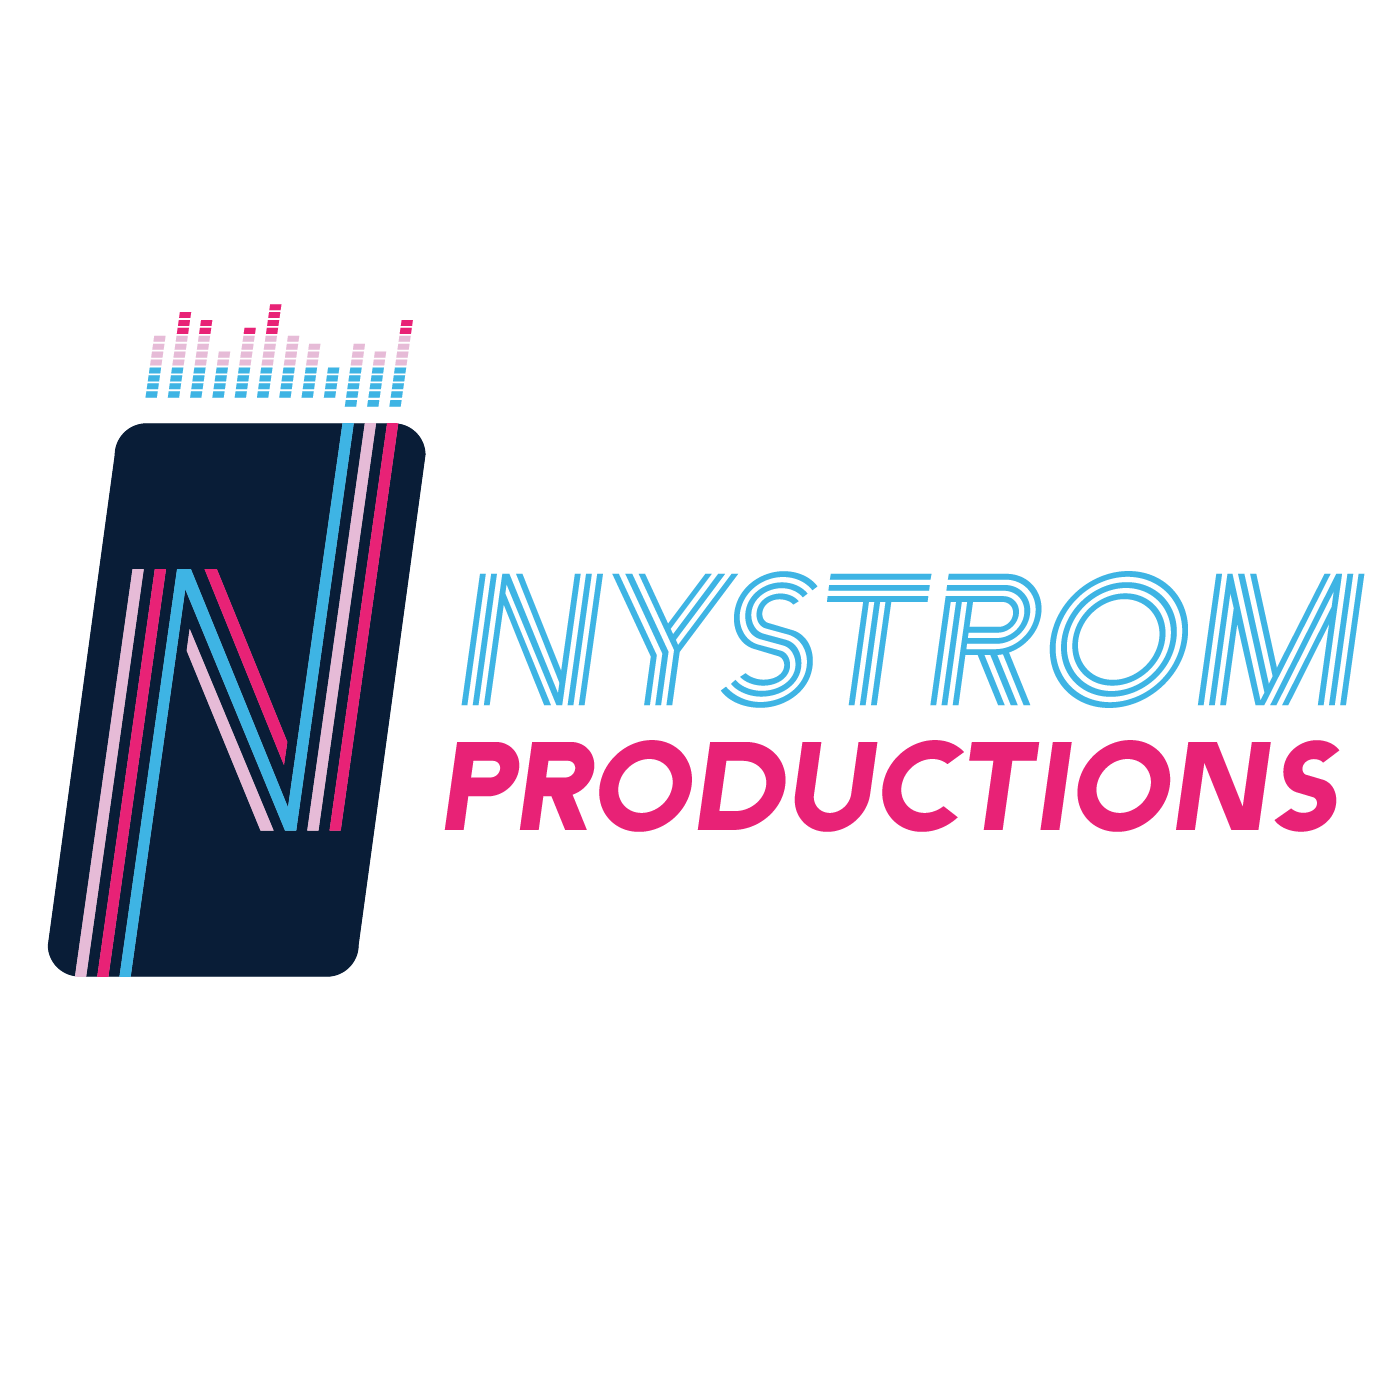 Nystrom Productions